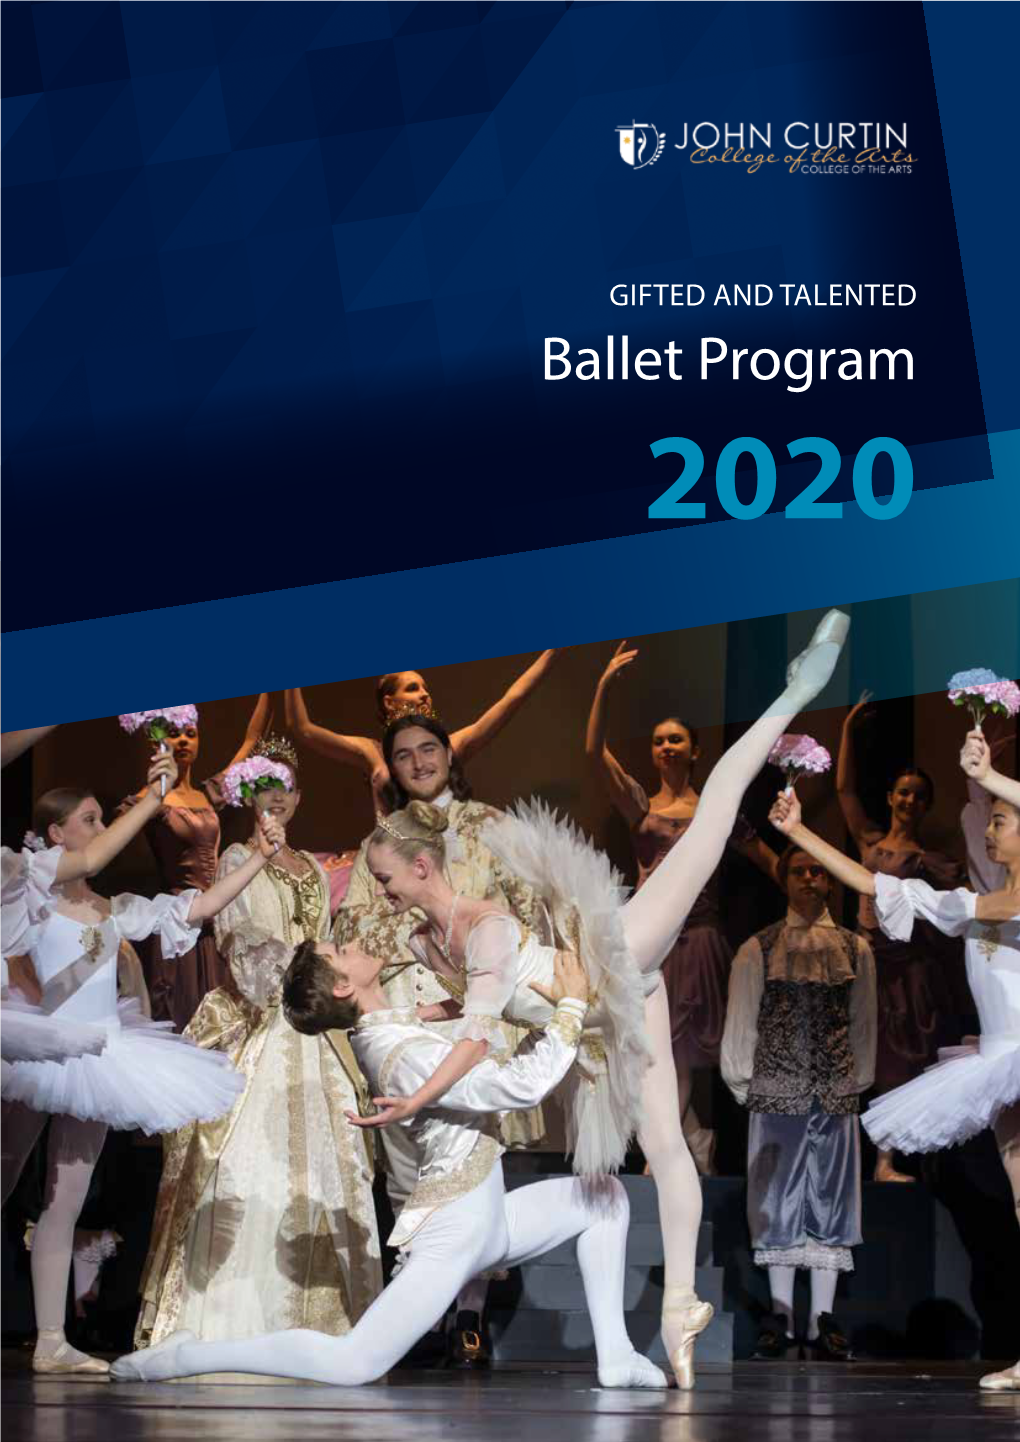 GIFTED and TALENTED Ballet Program 2020 2 / Gifted and Talented | Ballet Program 2020 Welcome